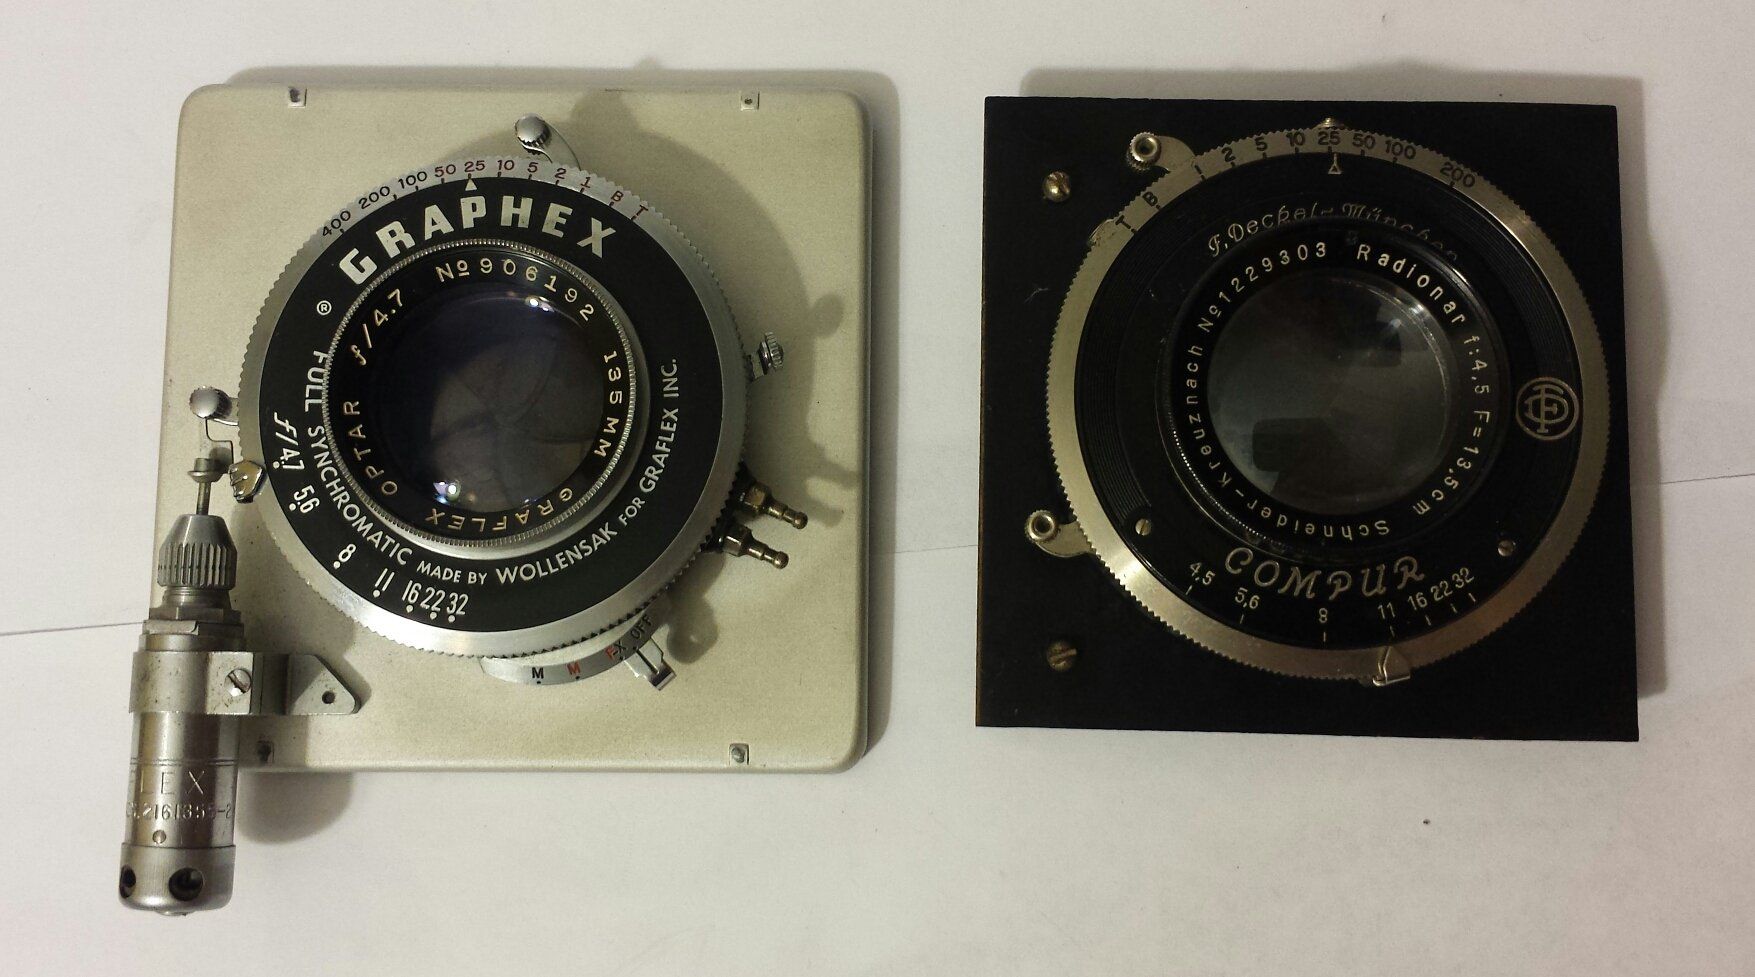 Lenses of the Pacemaker (left) and the Anniversary (right) Speed Graphics, removed from the cameras.